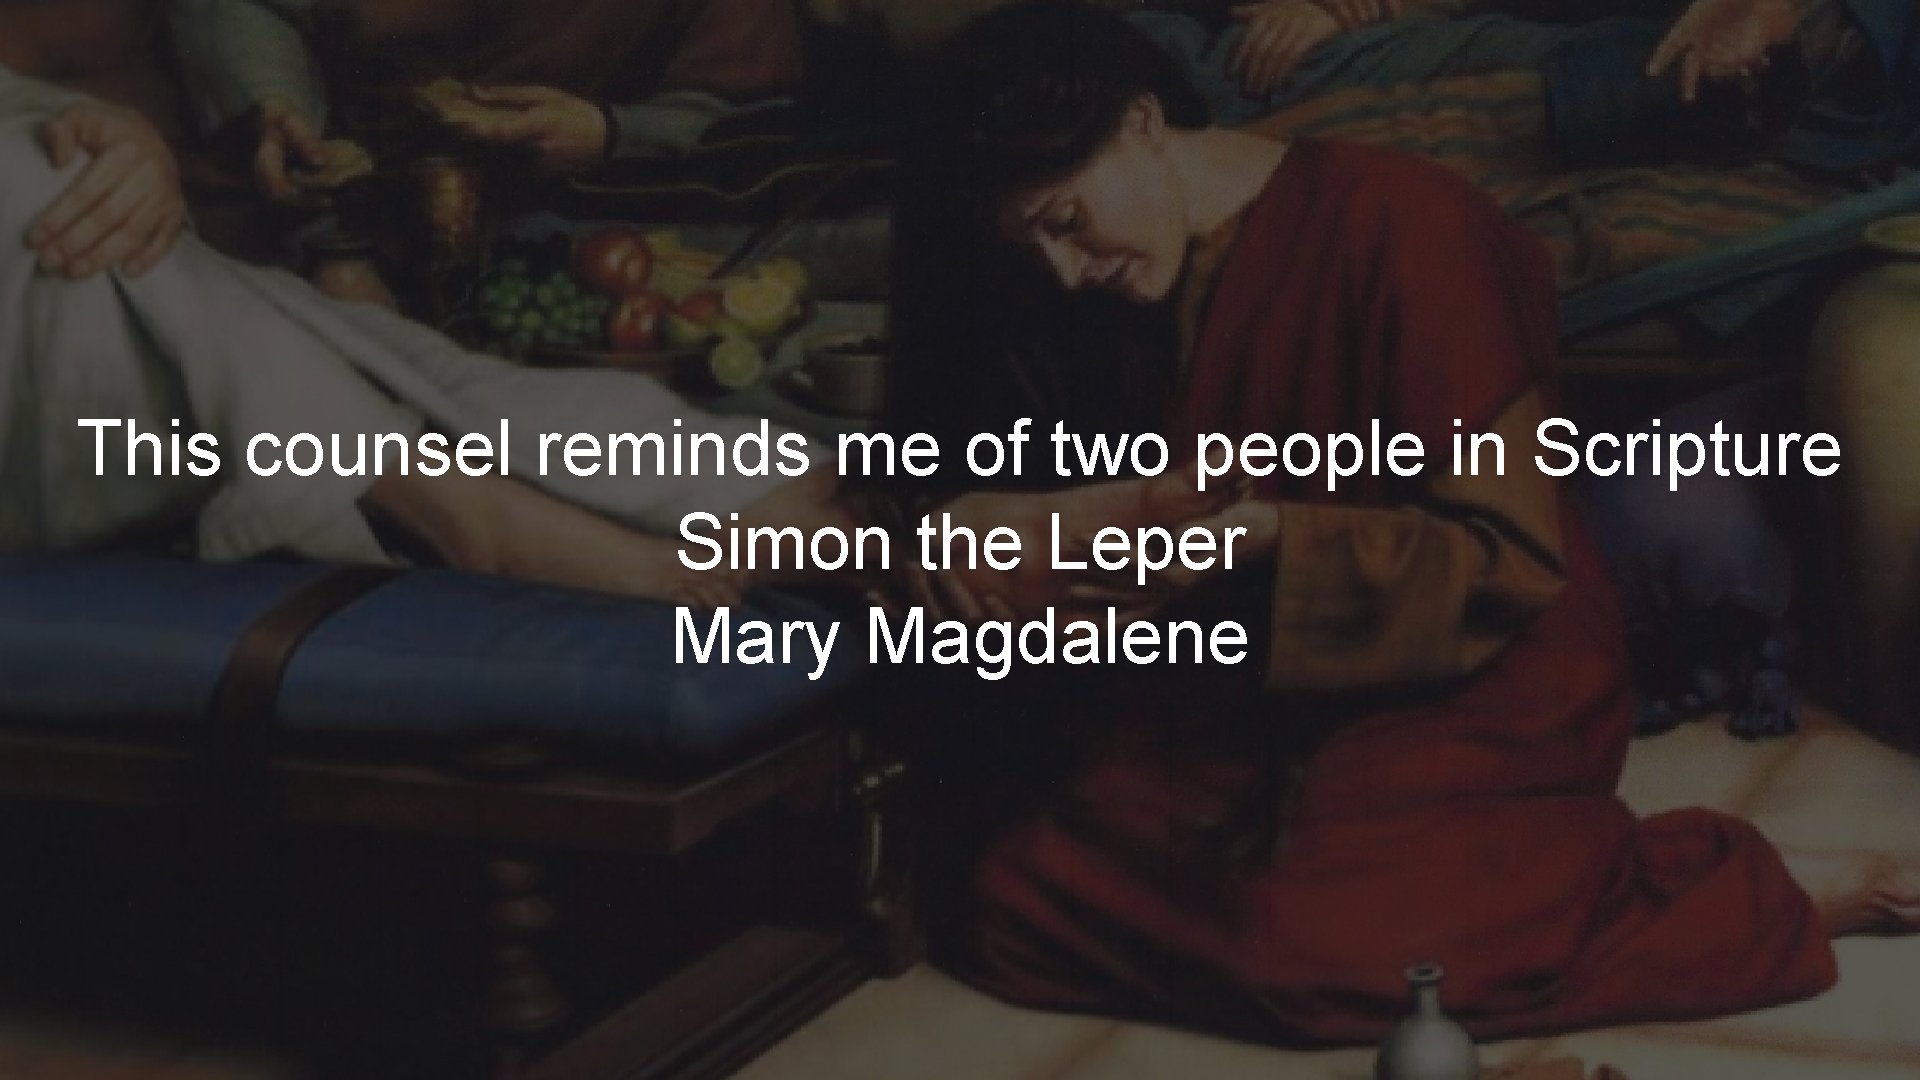 This counsel reminds me of two people in Scripture Simon the Leper Mary Magdalene